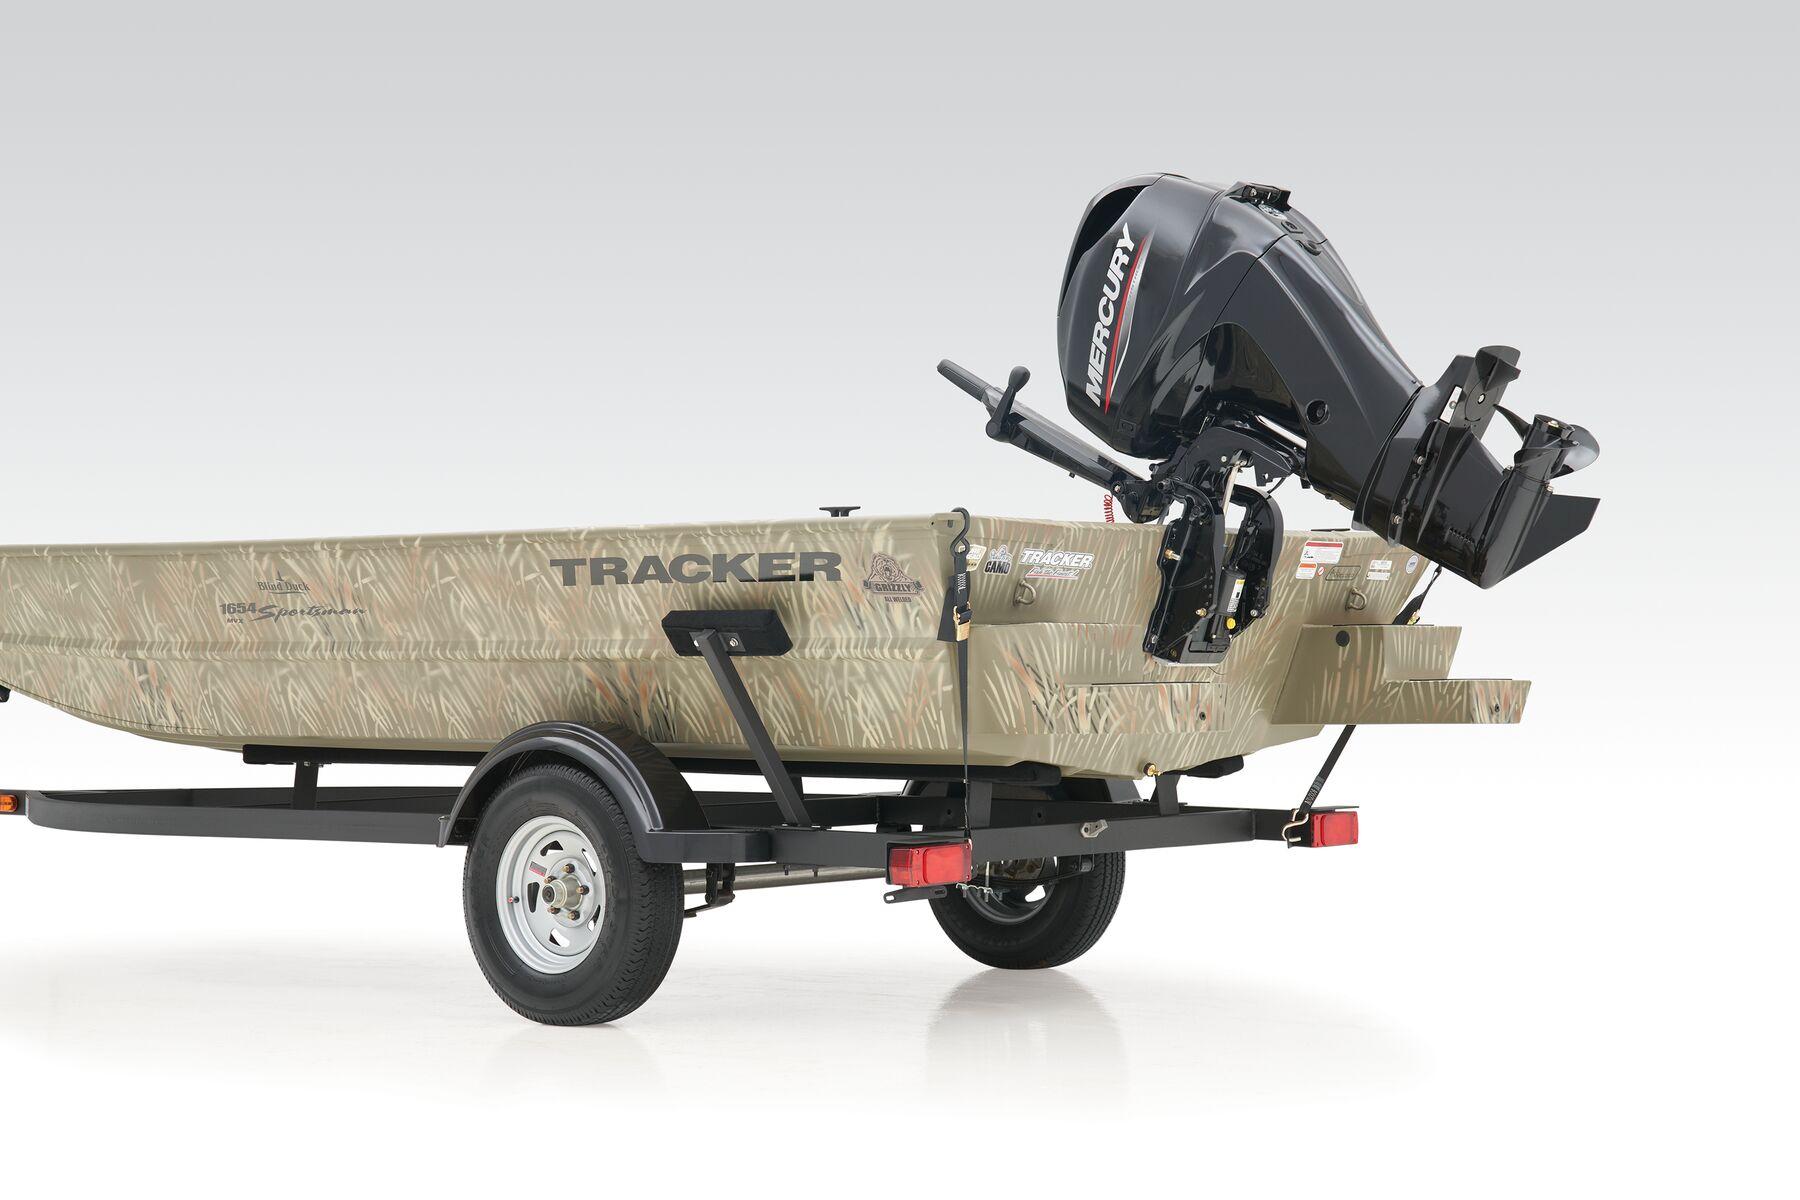 Manufacturer Provided Image: Tracker Grizzly 1654 T Sportsman